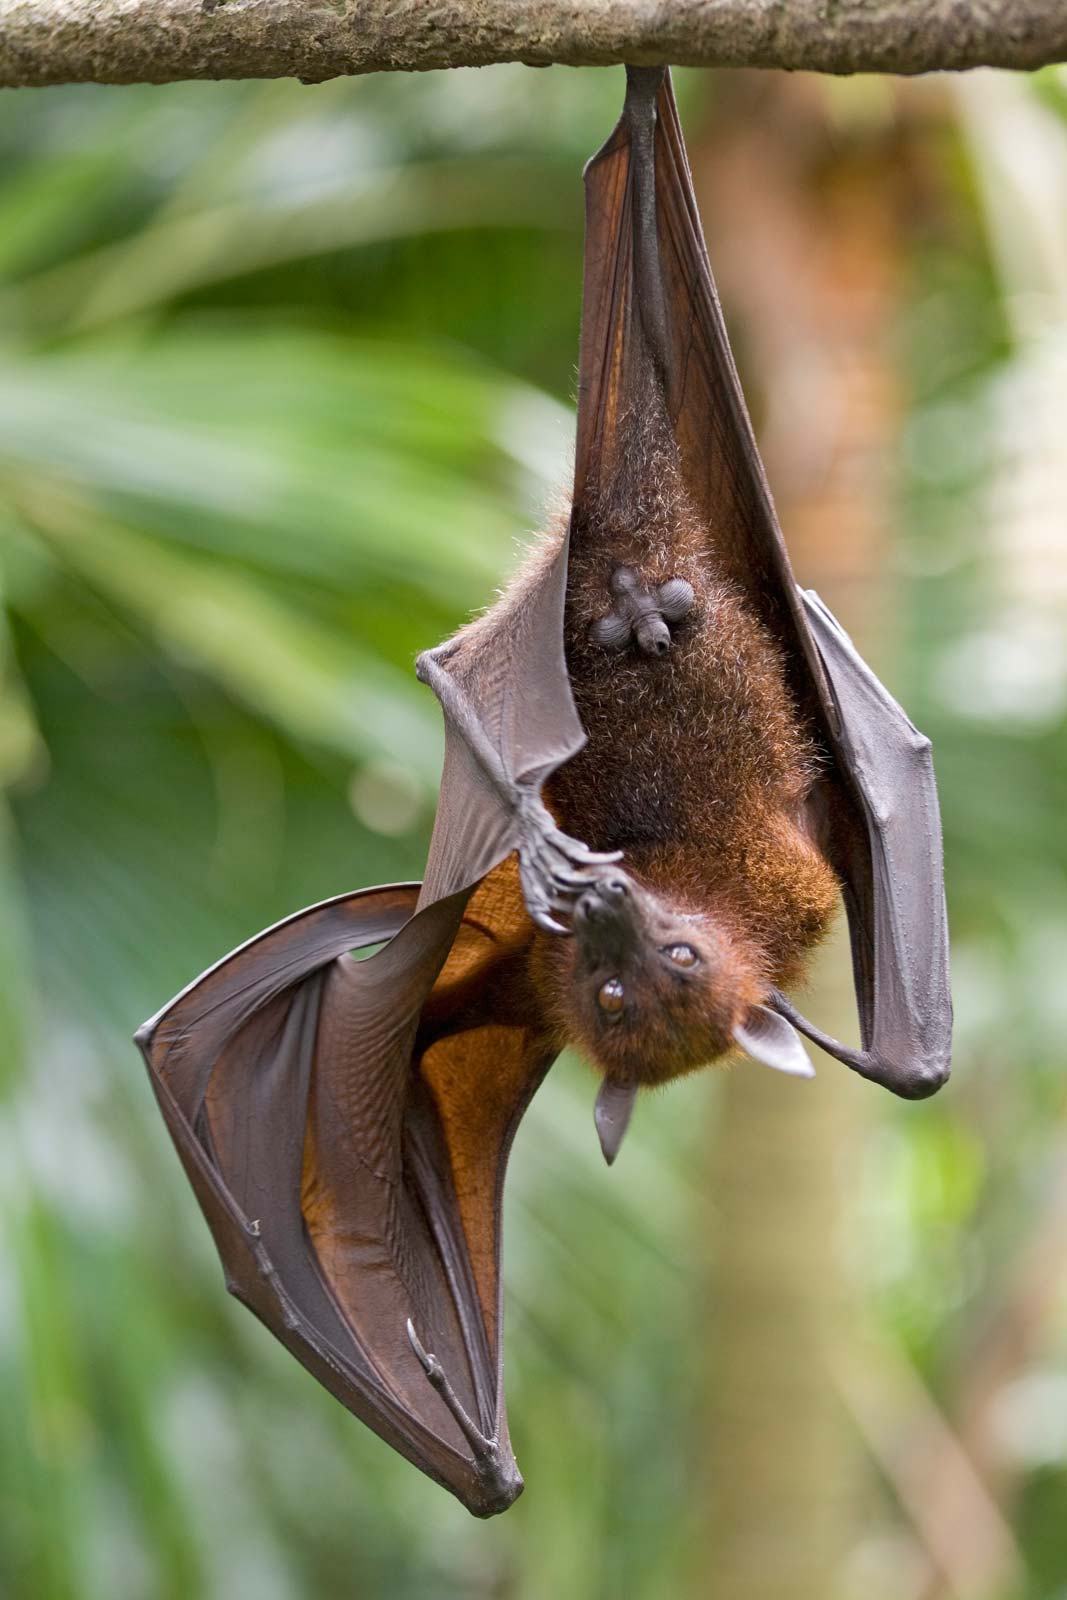 What is a flying fox called?